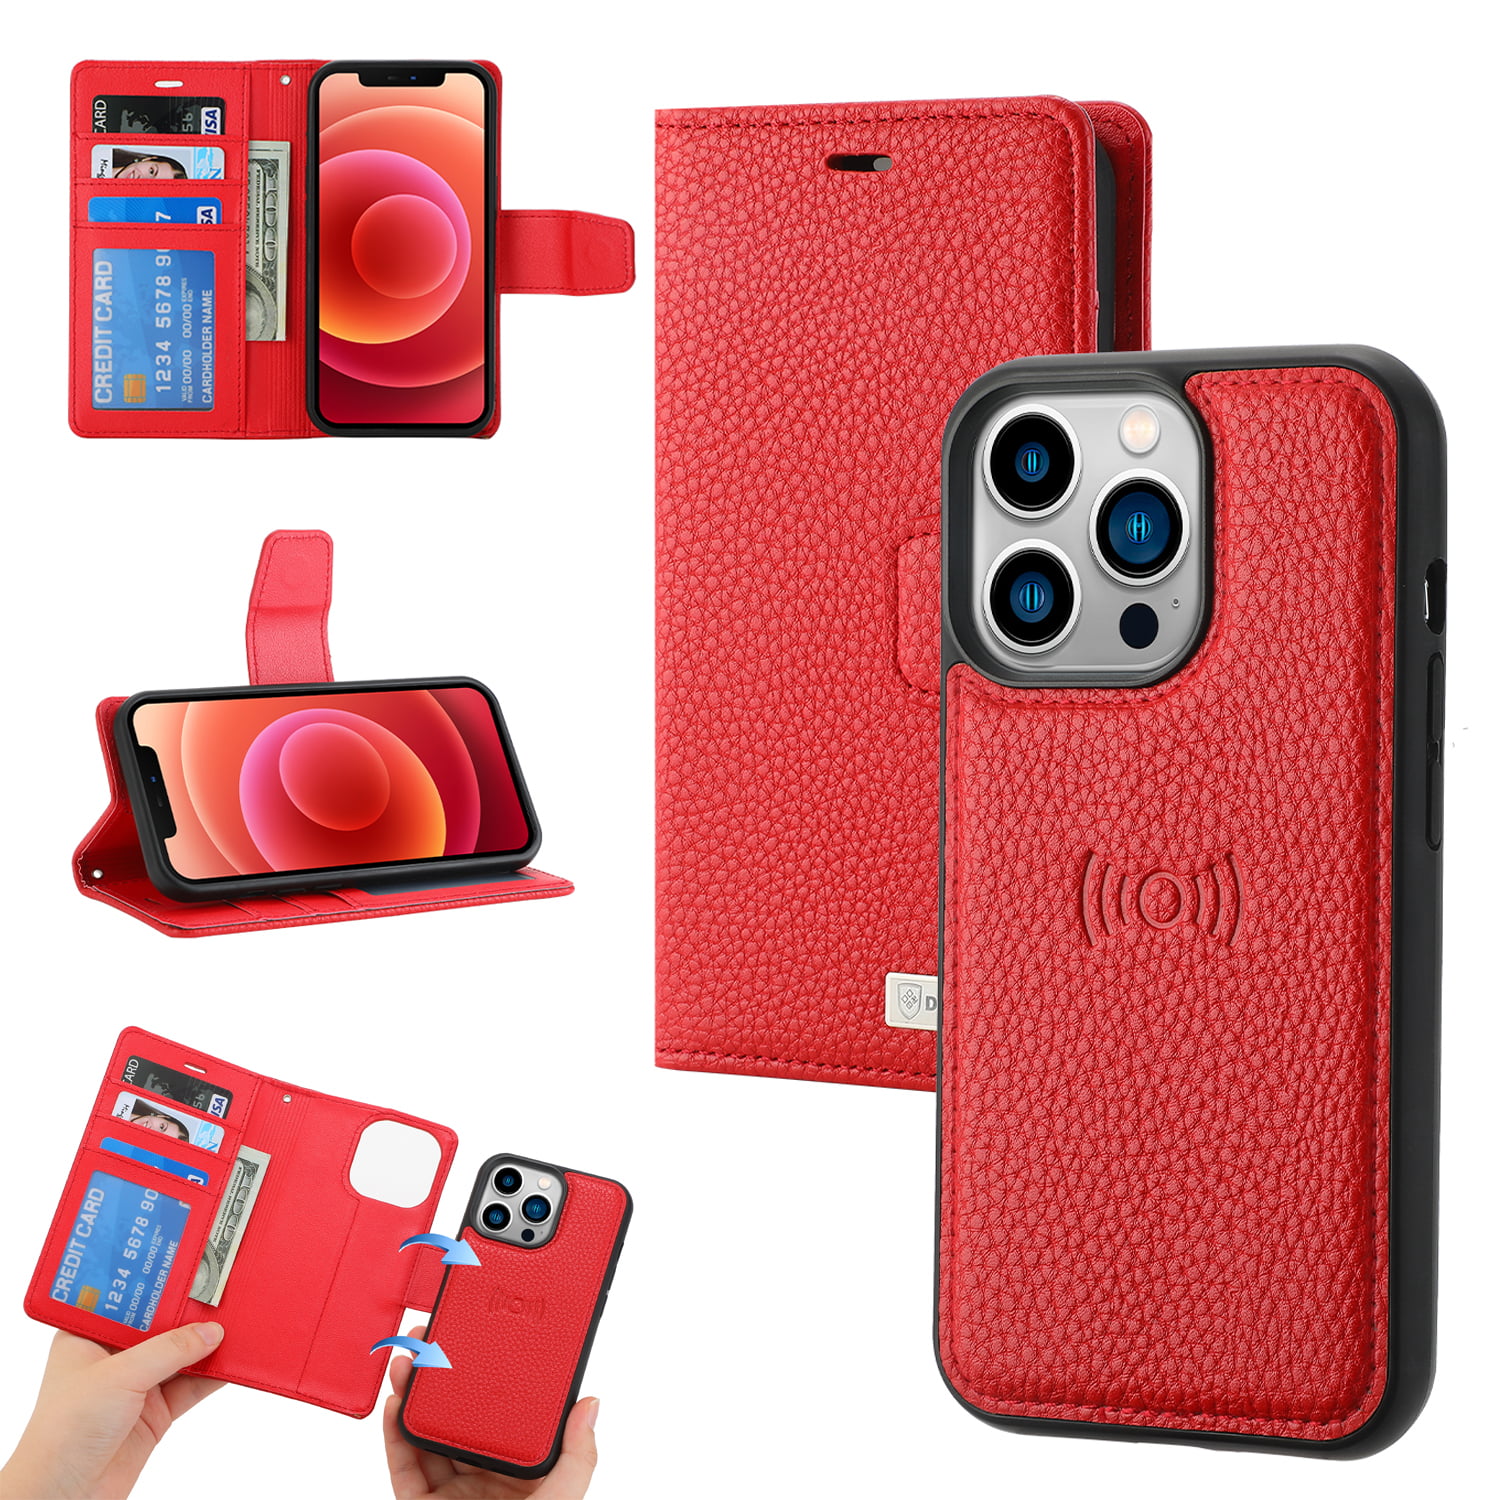 Wallet Case for iPhone 13 Pro Max 6.7 2021, Allytech Lightweight Thin Slim  Hard Back Card Slot Magnetic Vertical and Horizontal Stand Shockproof PU  Leather Case for iPhone 13 Pro Max 2021, Red 